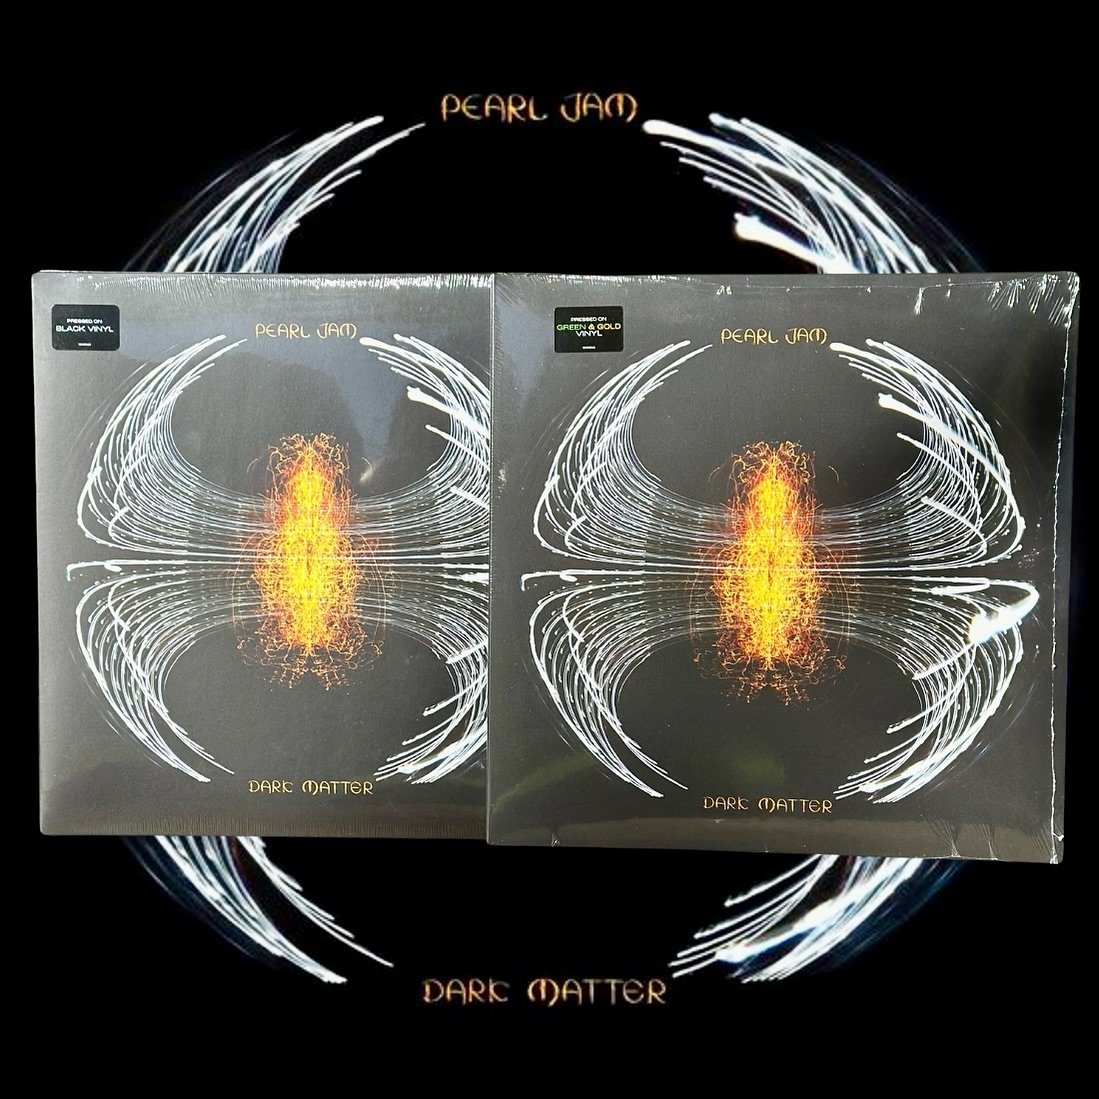 We have 🤘 different vinyl variants of @pearljam&rsquo;s new album &ldquo;Dark Matter&rdquo; available in our shop today&mdash; Black and a limited edition Green &amp; Gold version that is only available from independent record shops in the Pacific N